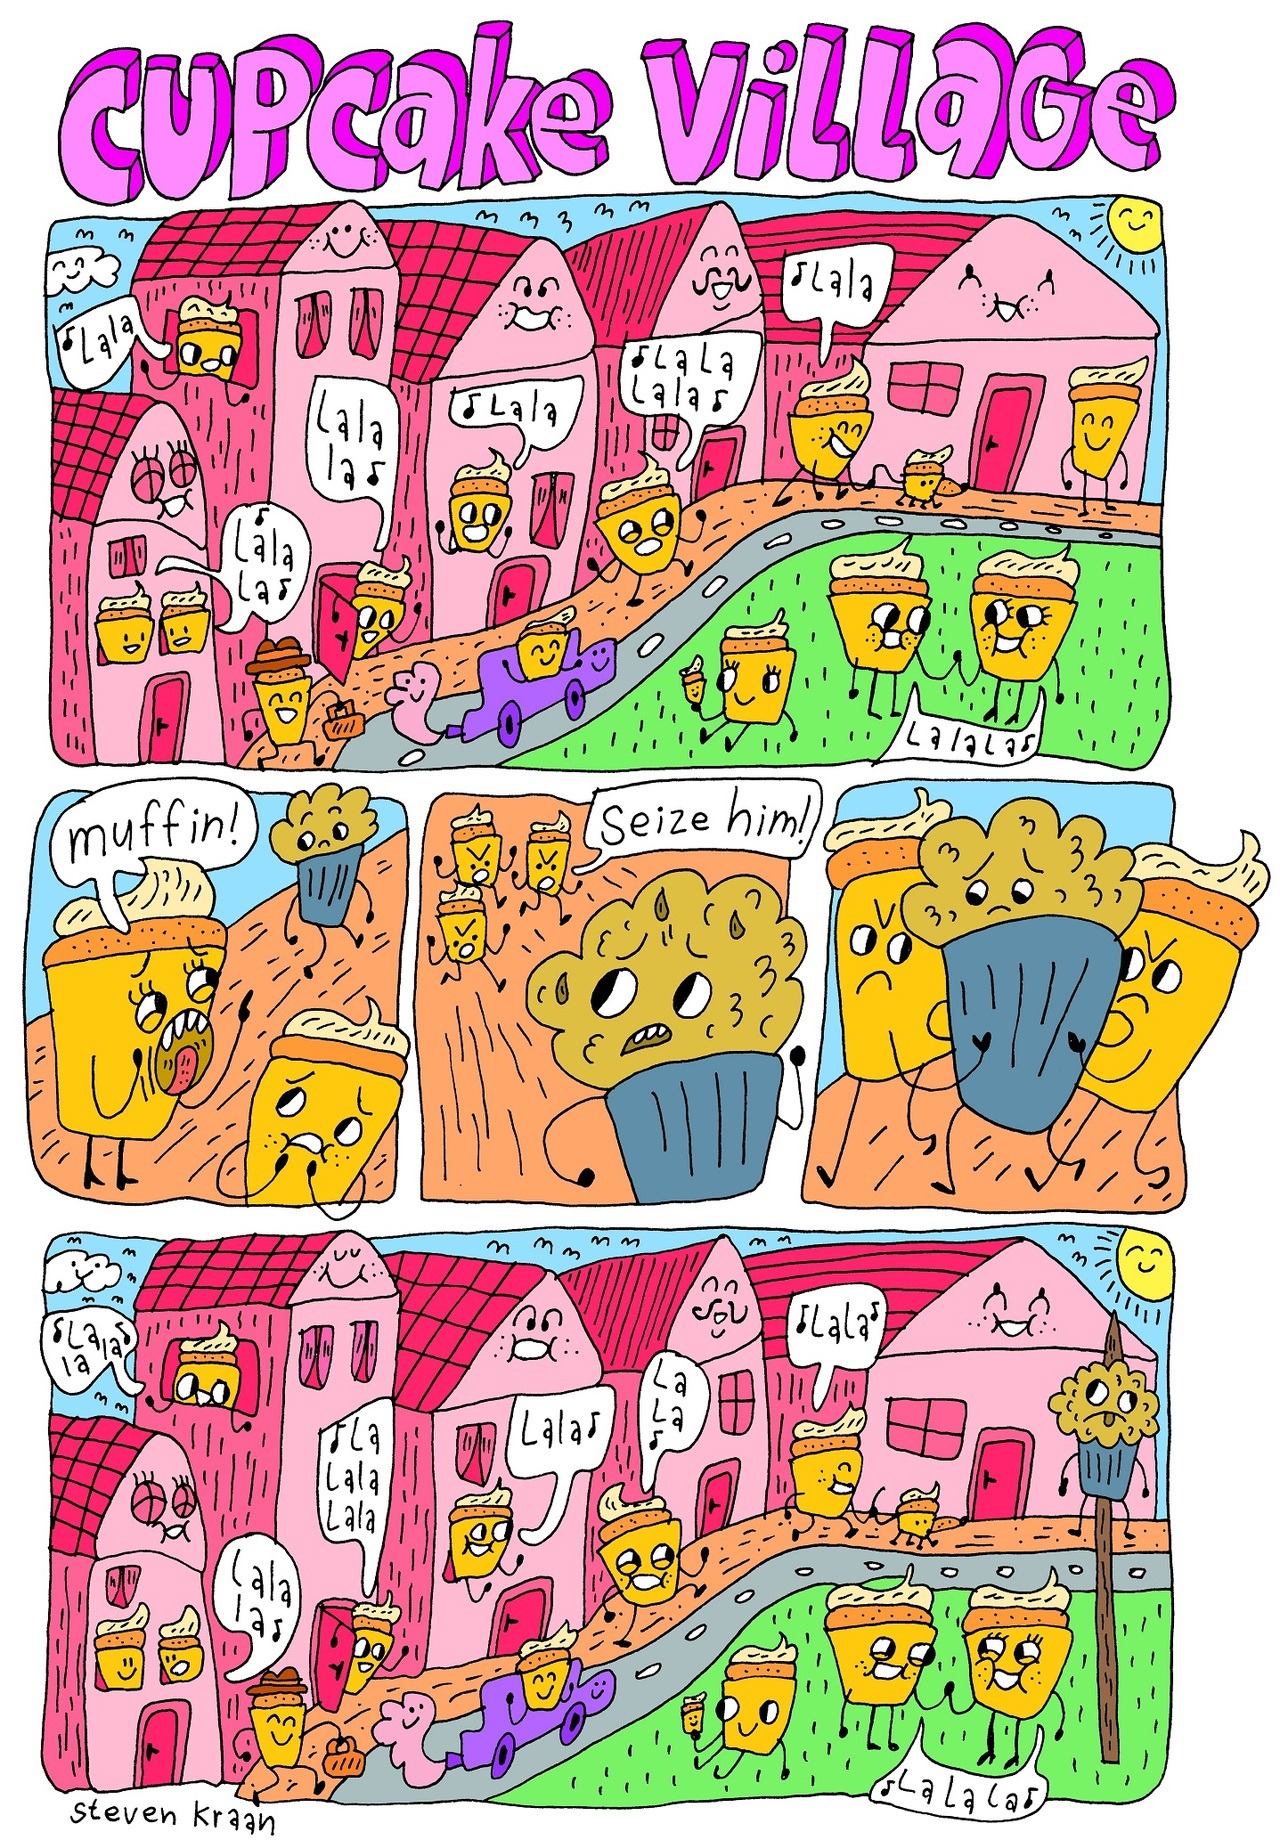 // cupcake village // For more comics, please visit one of my pages ^__^ http://www.facebook.com/drawingdaily or http://stevenkraandrawingdaily.tumblr.com/